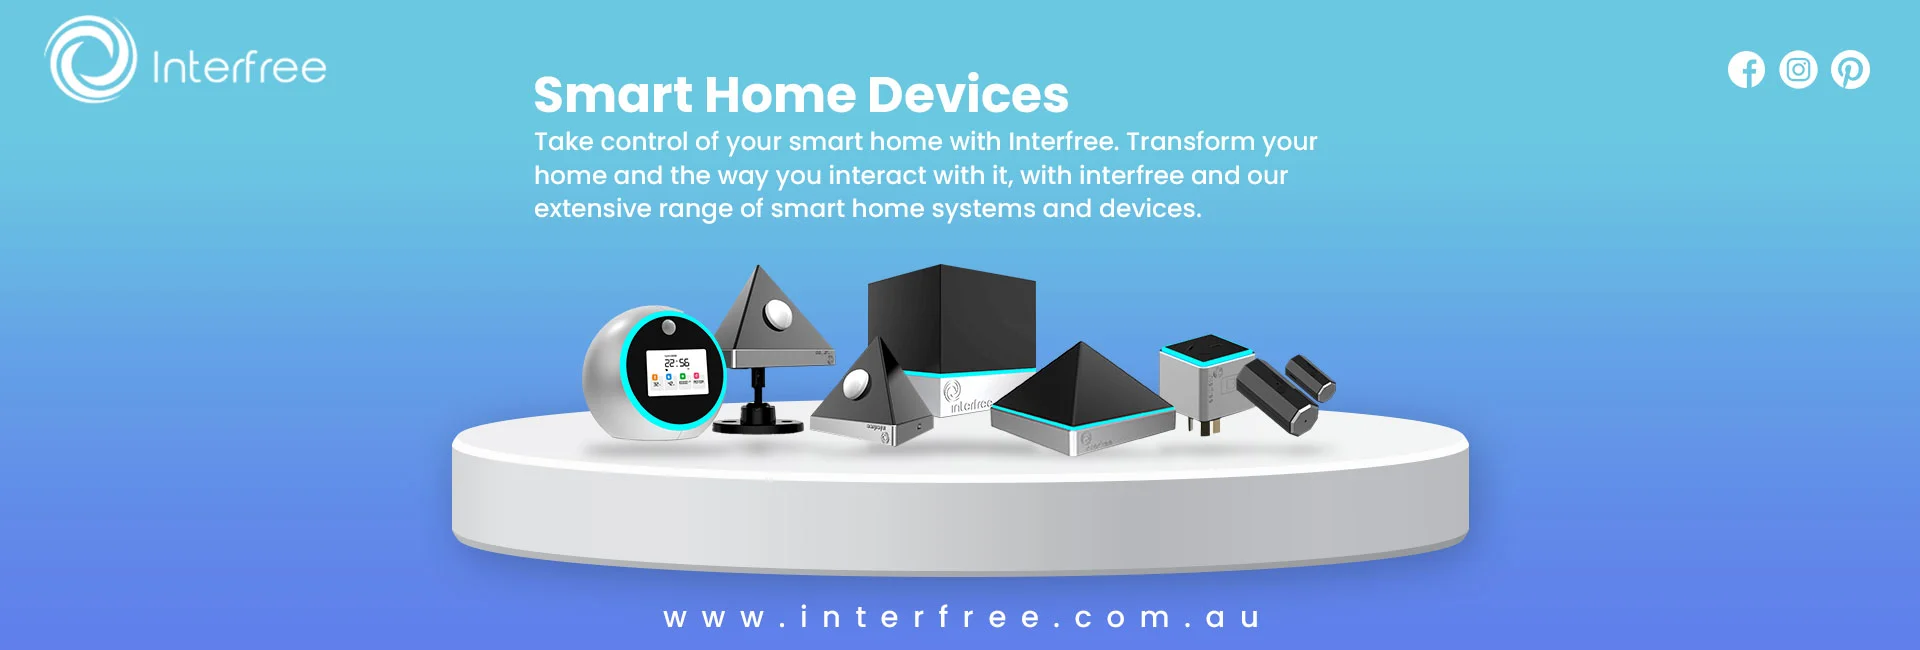 How do smart home devices integrate with IoT technology?